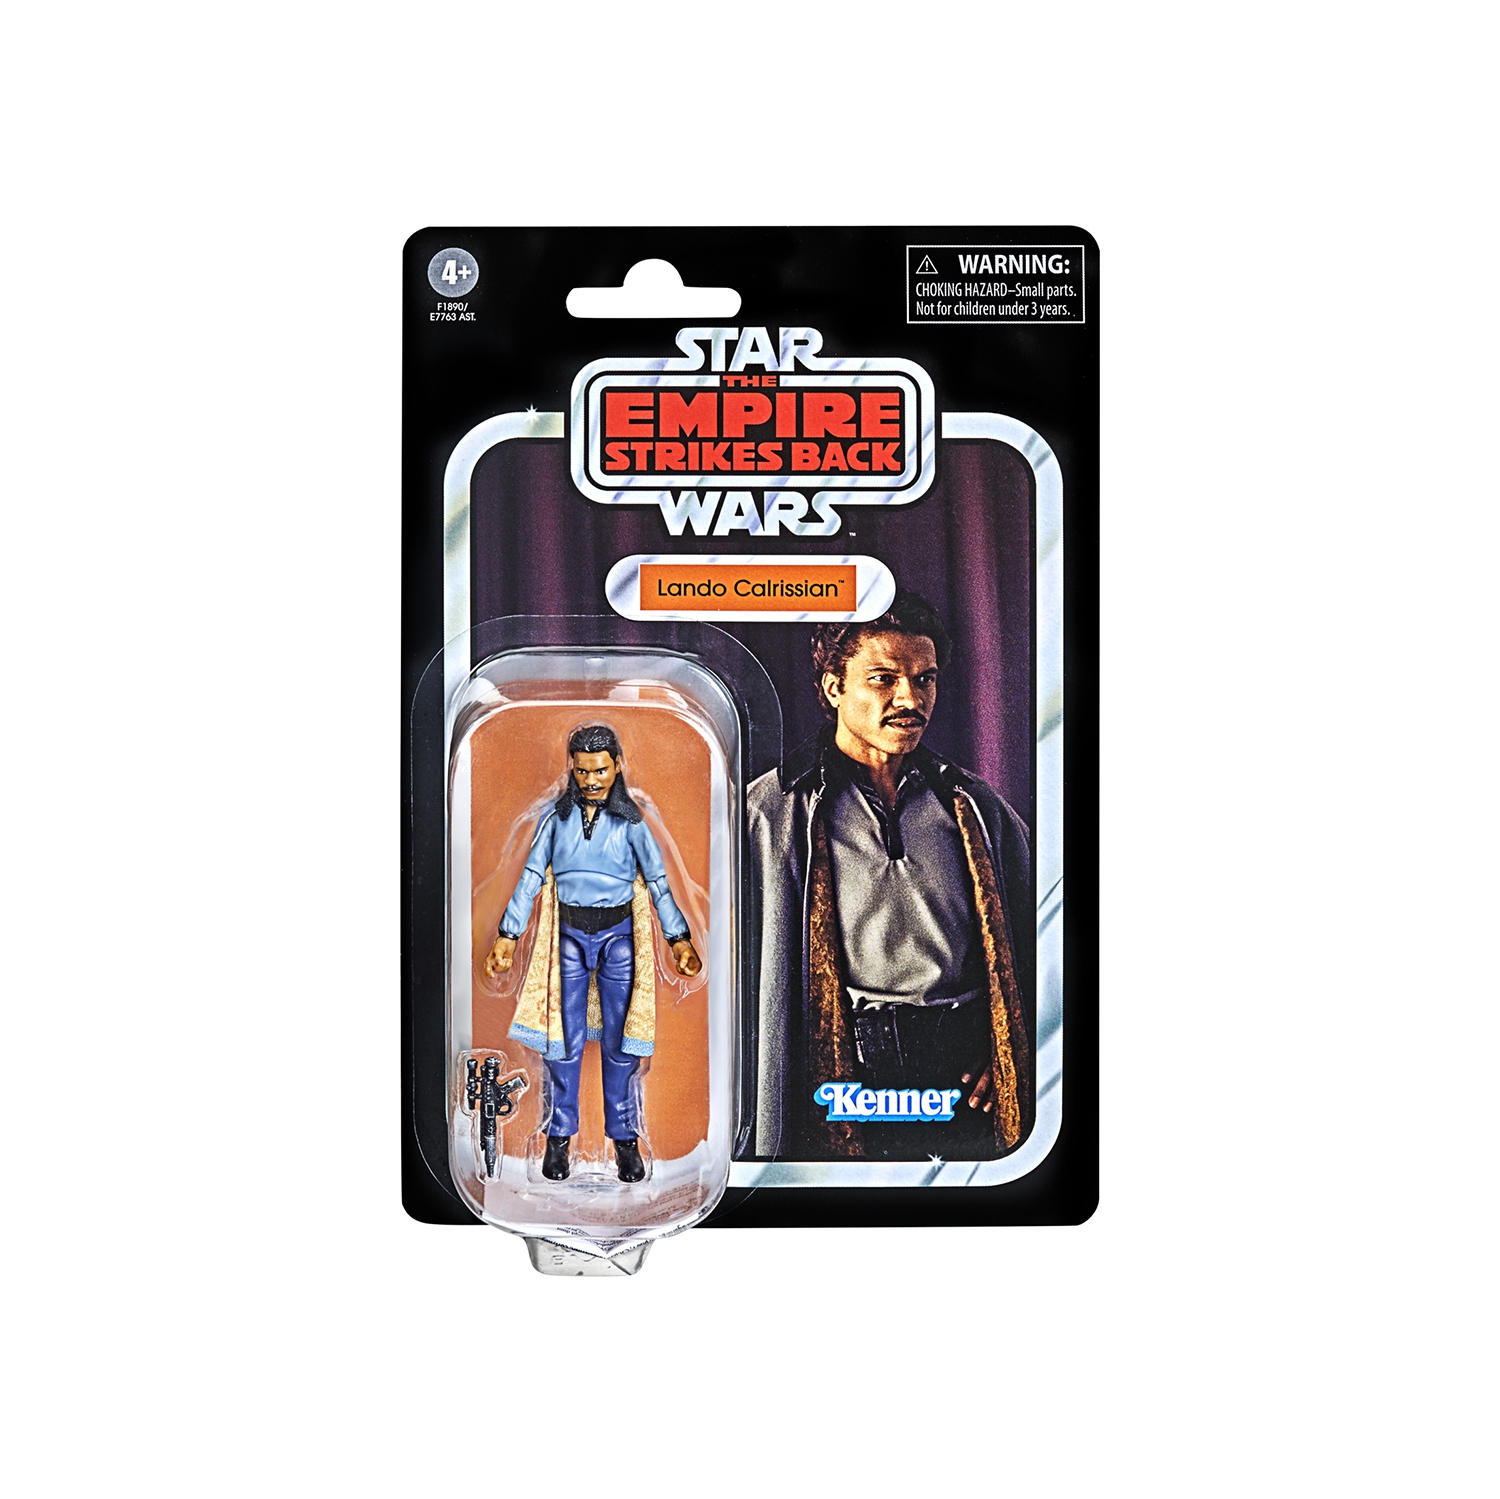 Star Wars The Vintage Collection 3.75 Inch Action Figure Wave 14 - Lando Calrissian VC205